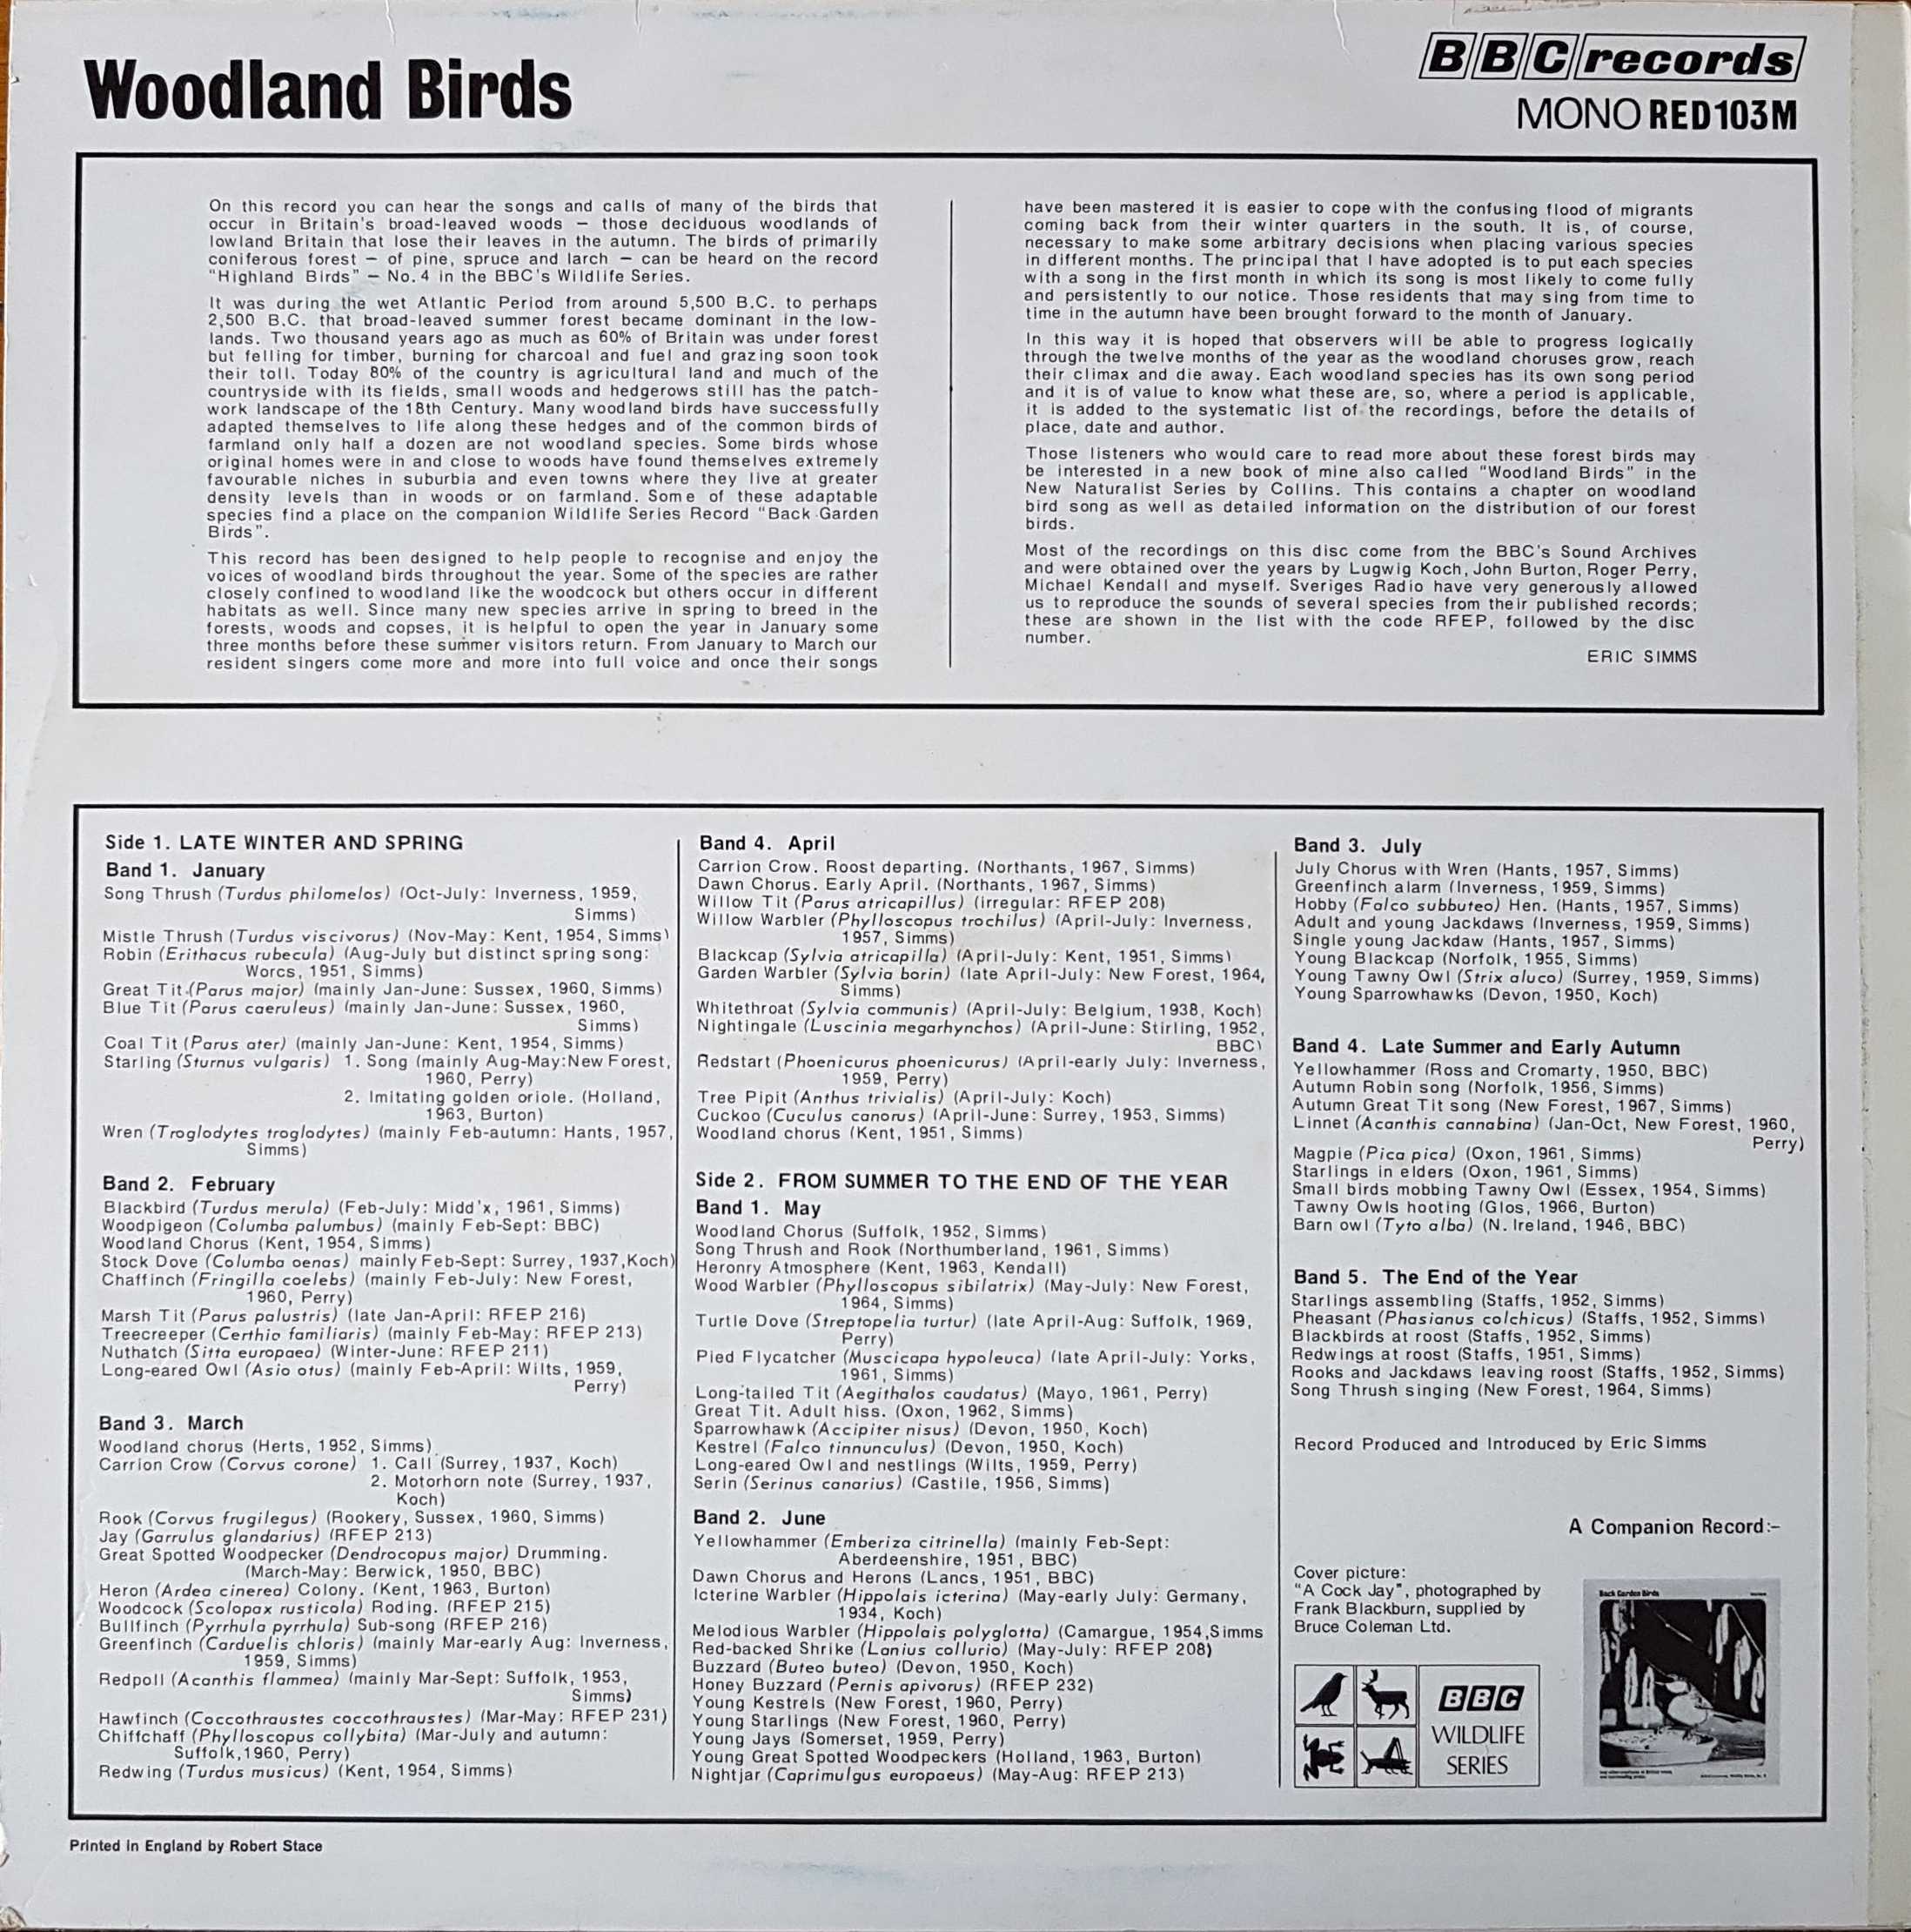 Picture of RED 103 Woodland birds by artist Various from the BBC records and Tapes library